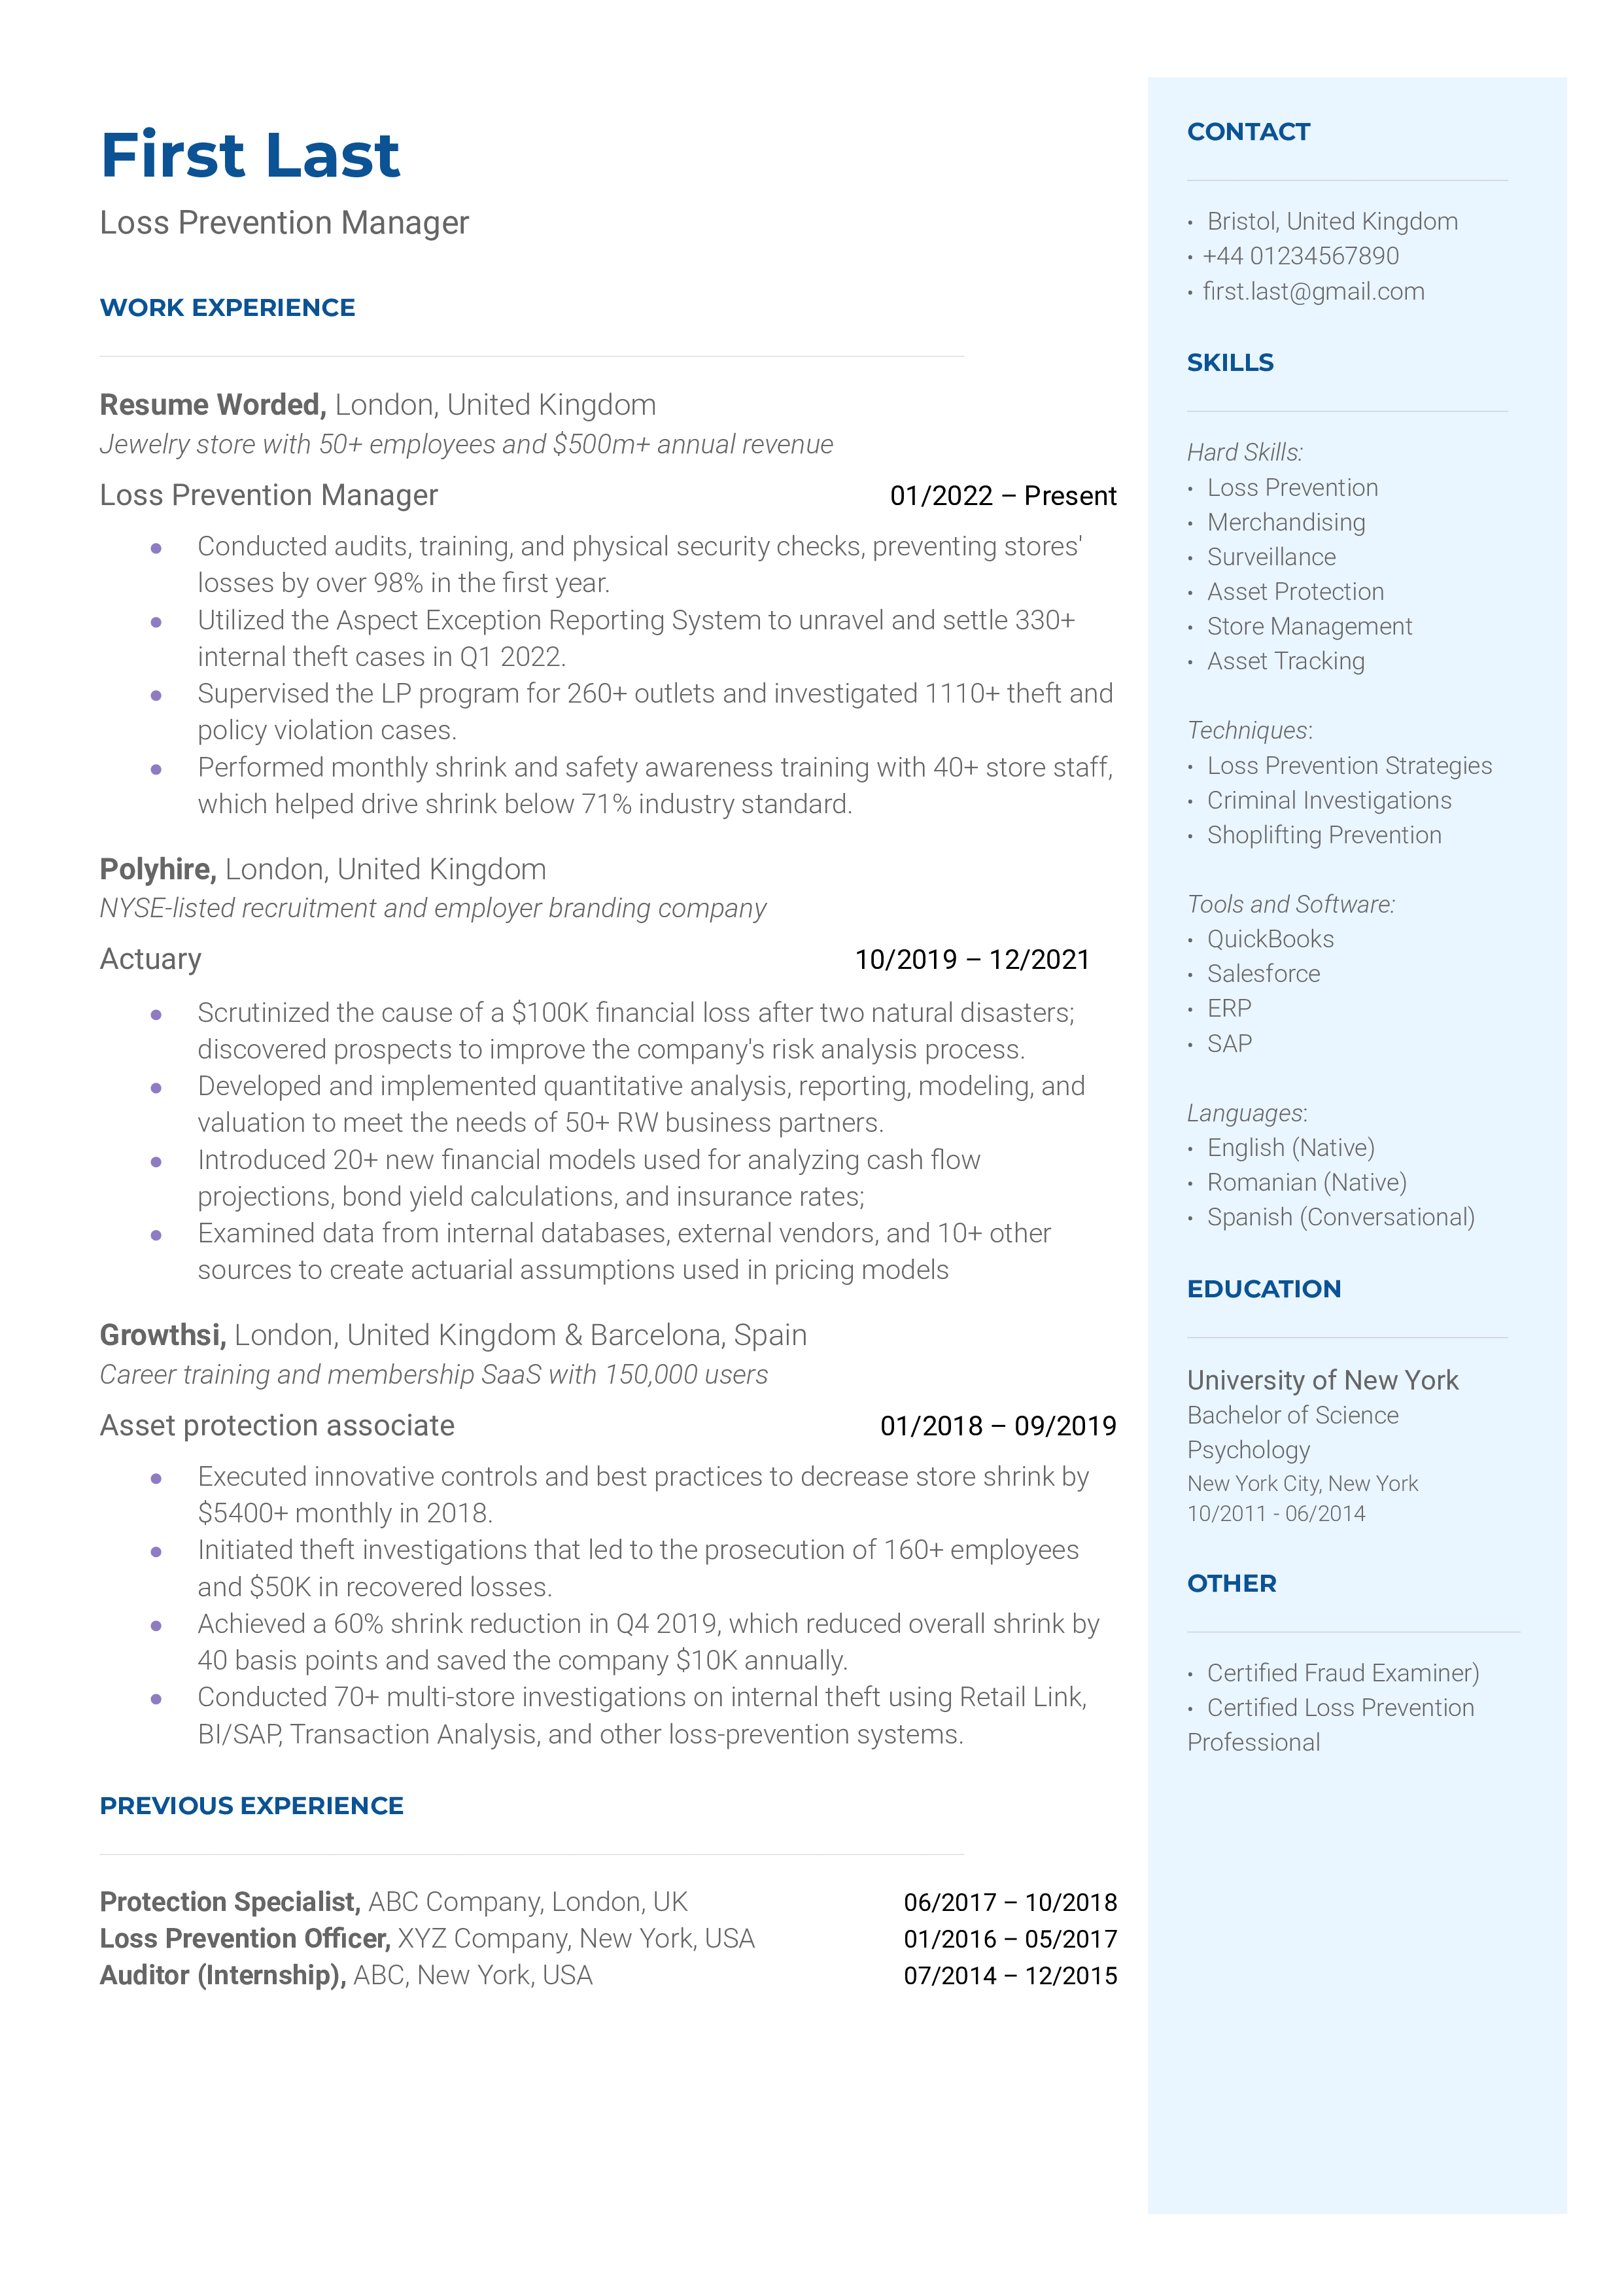 A loss prevention manager resume template highlighting loss prevention techniques.